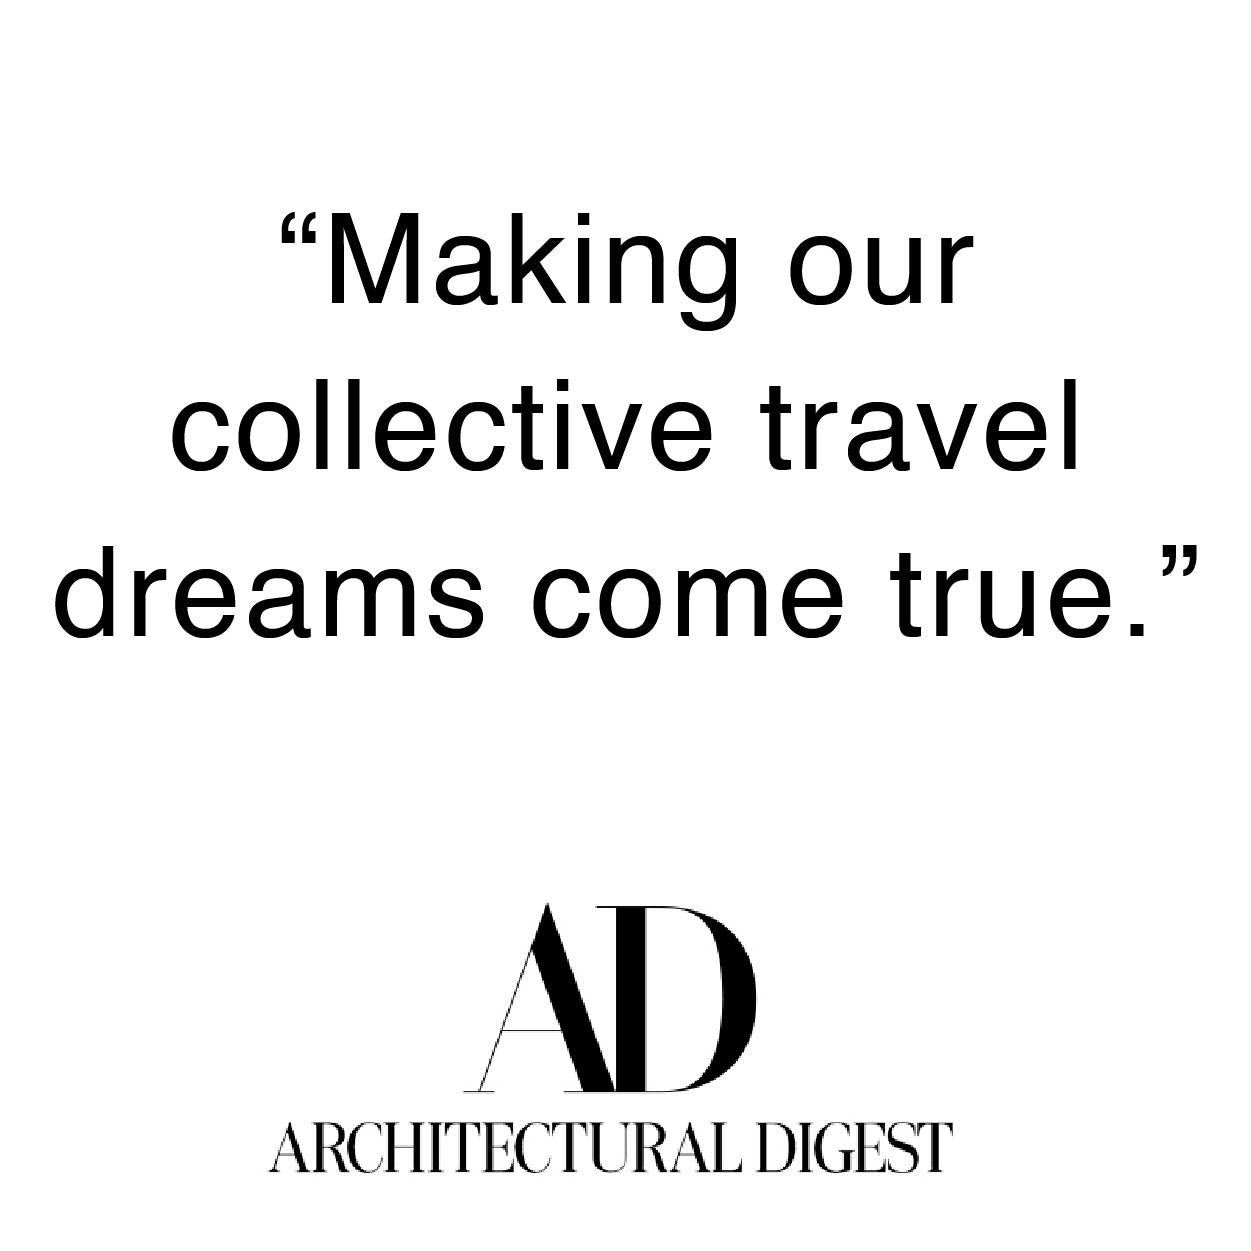 architectural digest press quote: making out collective travel dreams come true.